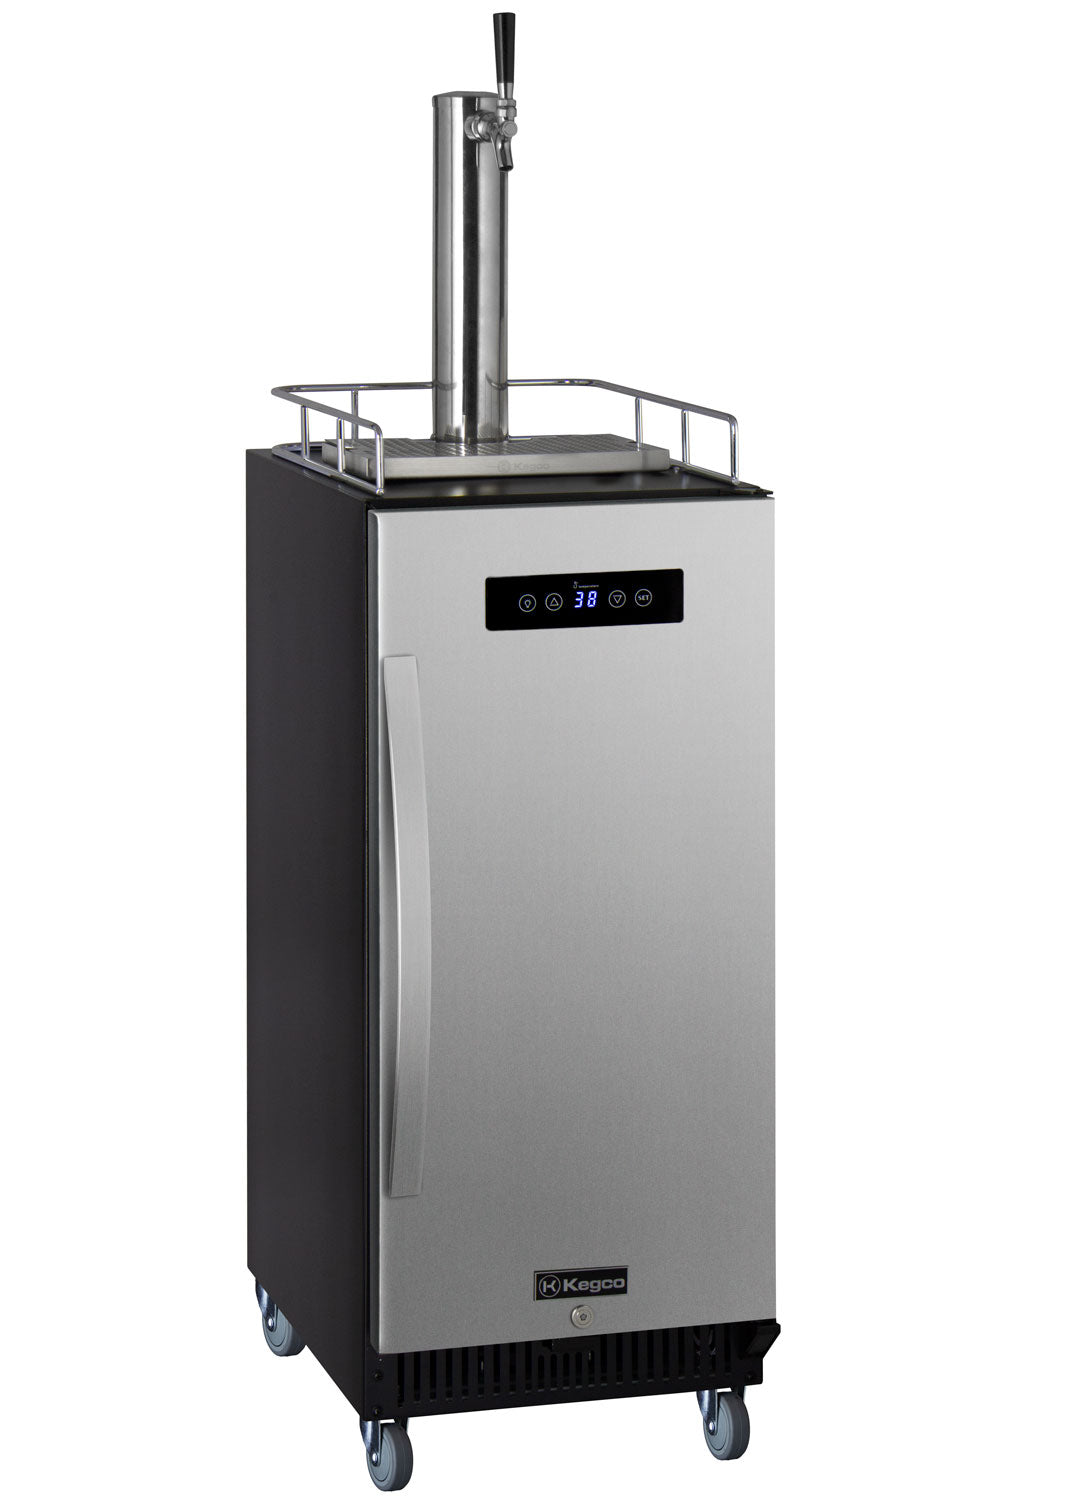 15" Wide Commercial Cold Brew Coffee Kegerator with Stainless Steel Door